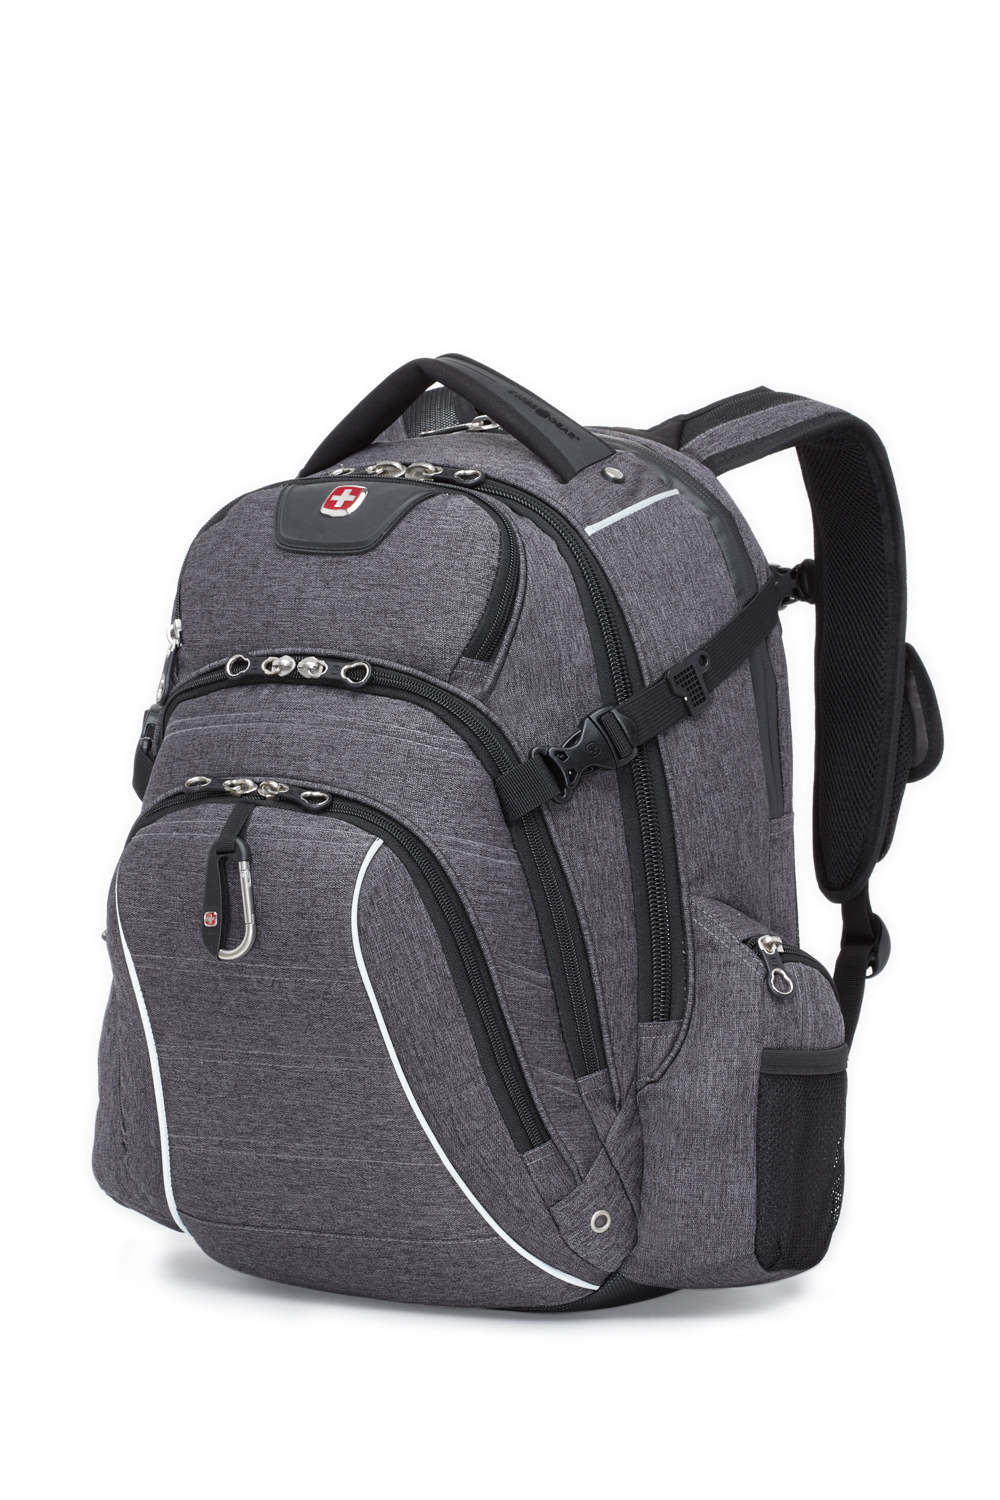 Swissgear 9855 17-inch Computer and Tablet Backpack - Grey